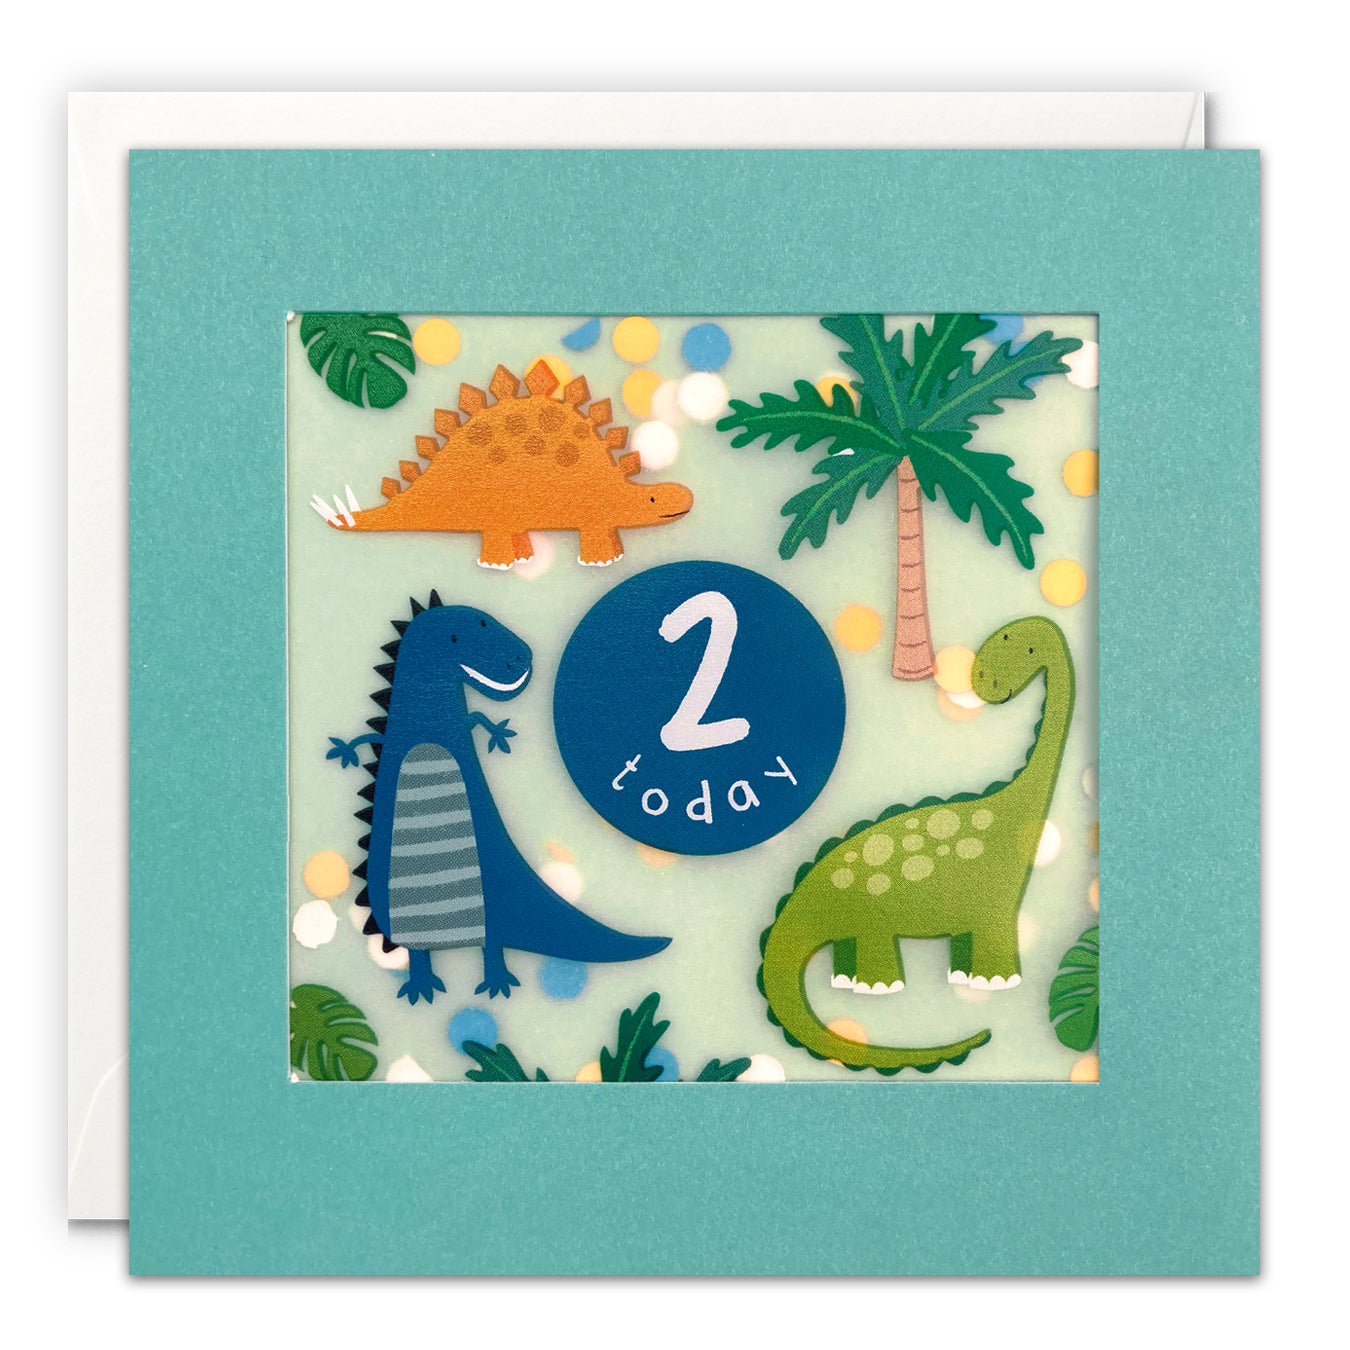 Age 2 Dinosaurs Shakies Birthday Card from Penny Black